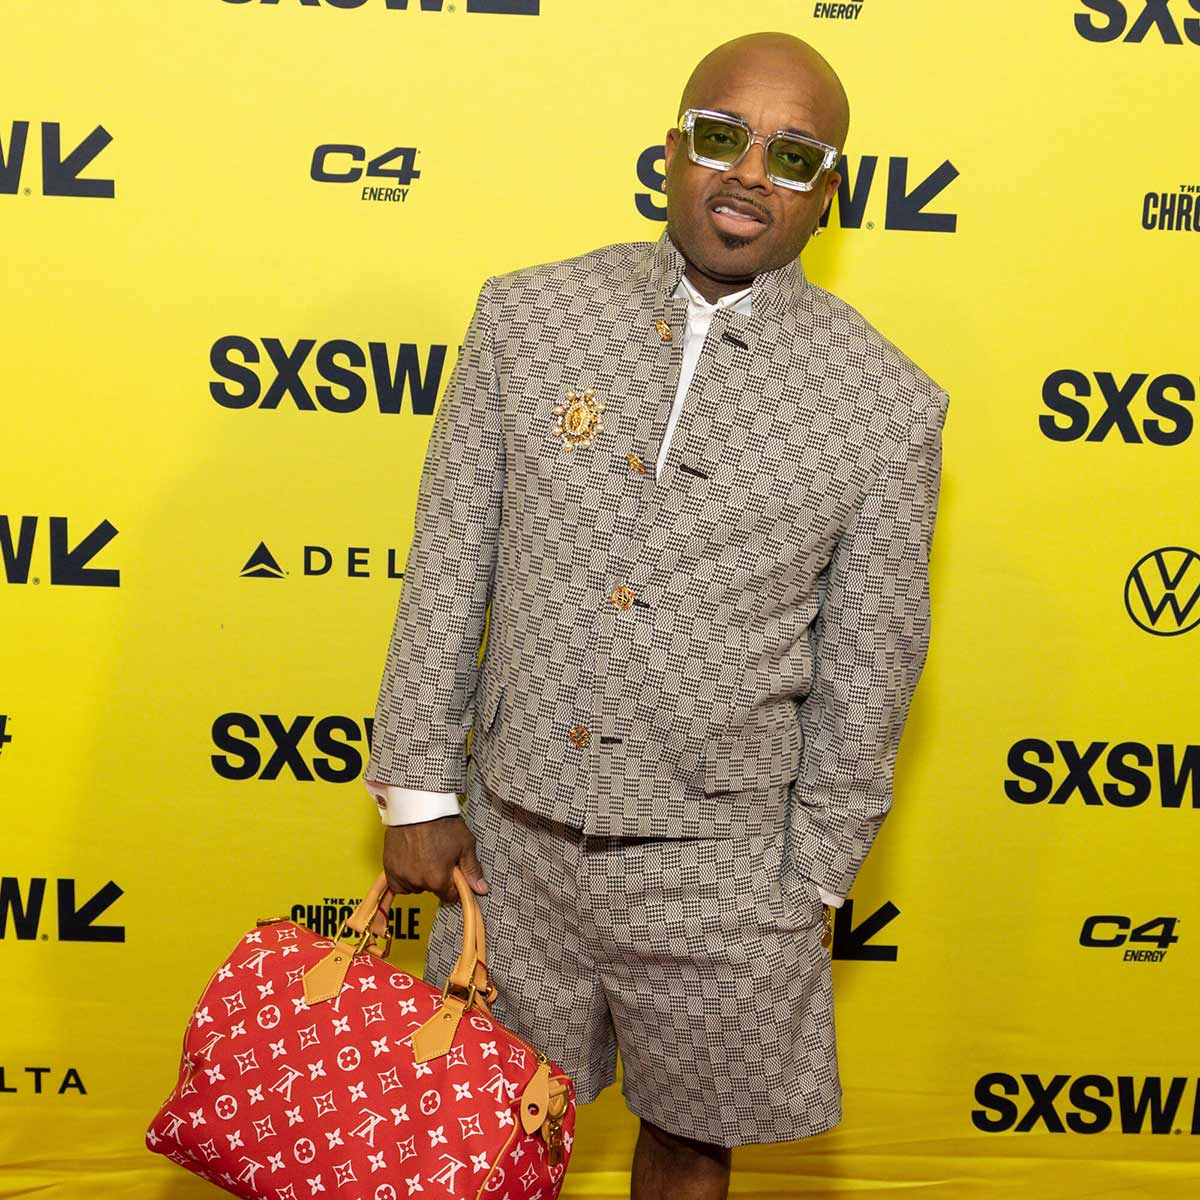 Music producer, executive and rapper Jermaine Dupri wearing designer clothes and holding a designer bag at the Freaknik premiere.